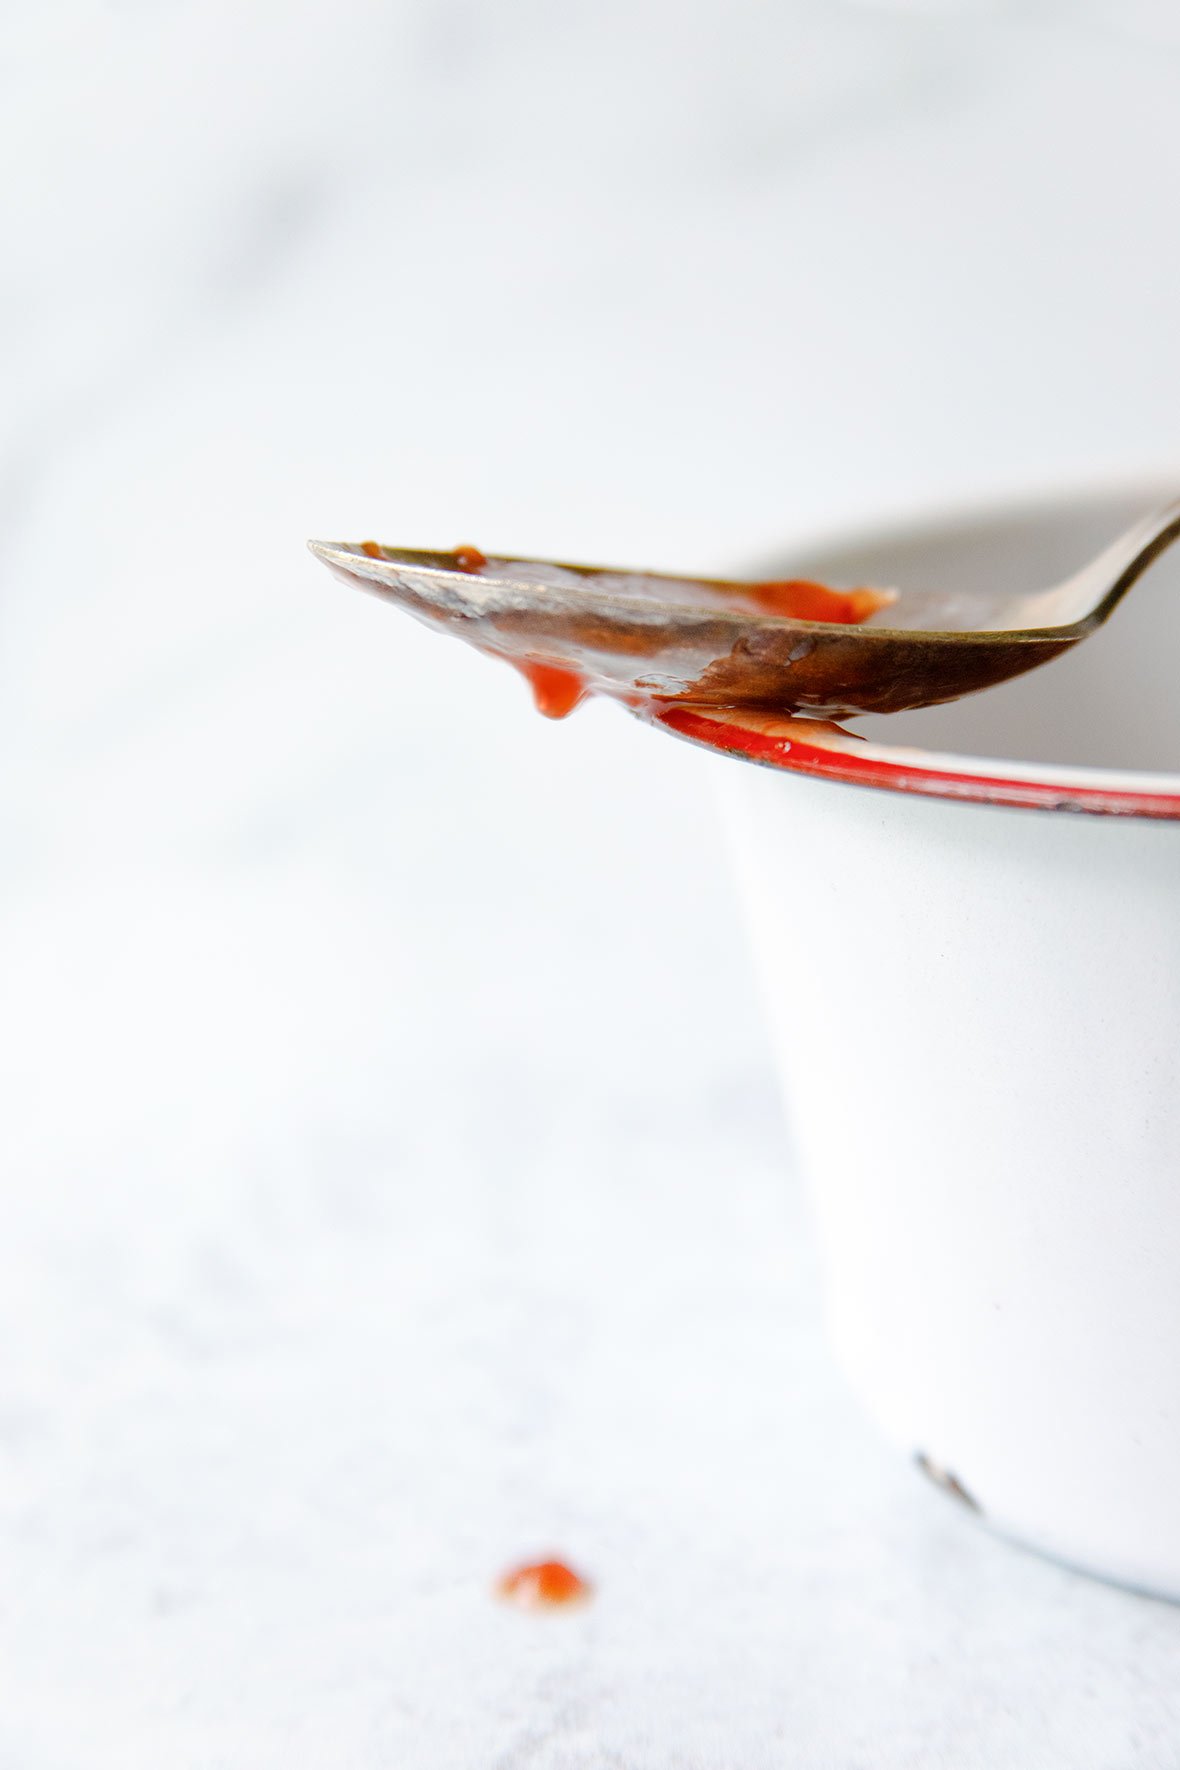 A spoon dripping with strawberry jam, resting on the edge of an enamel pot.